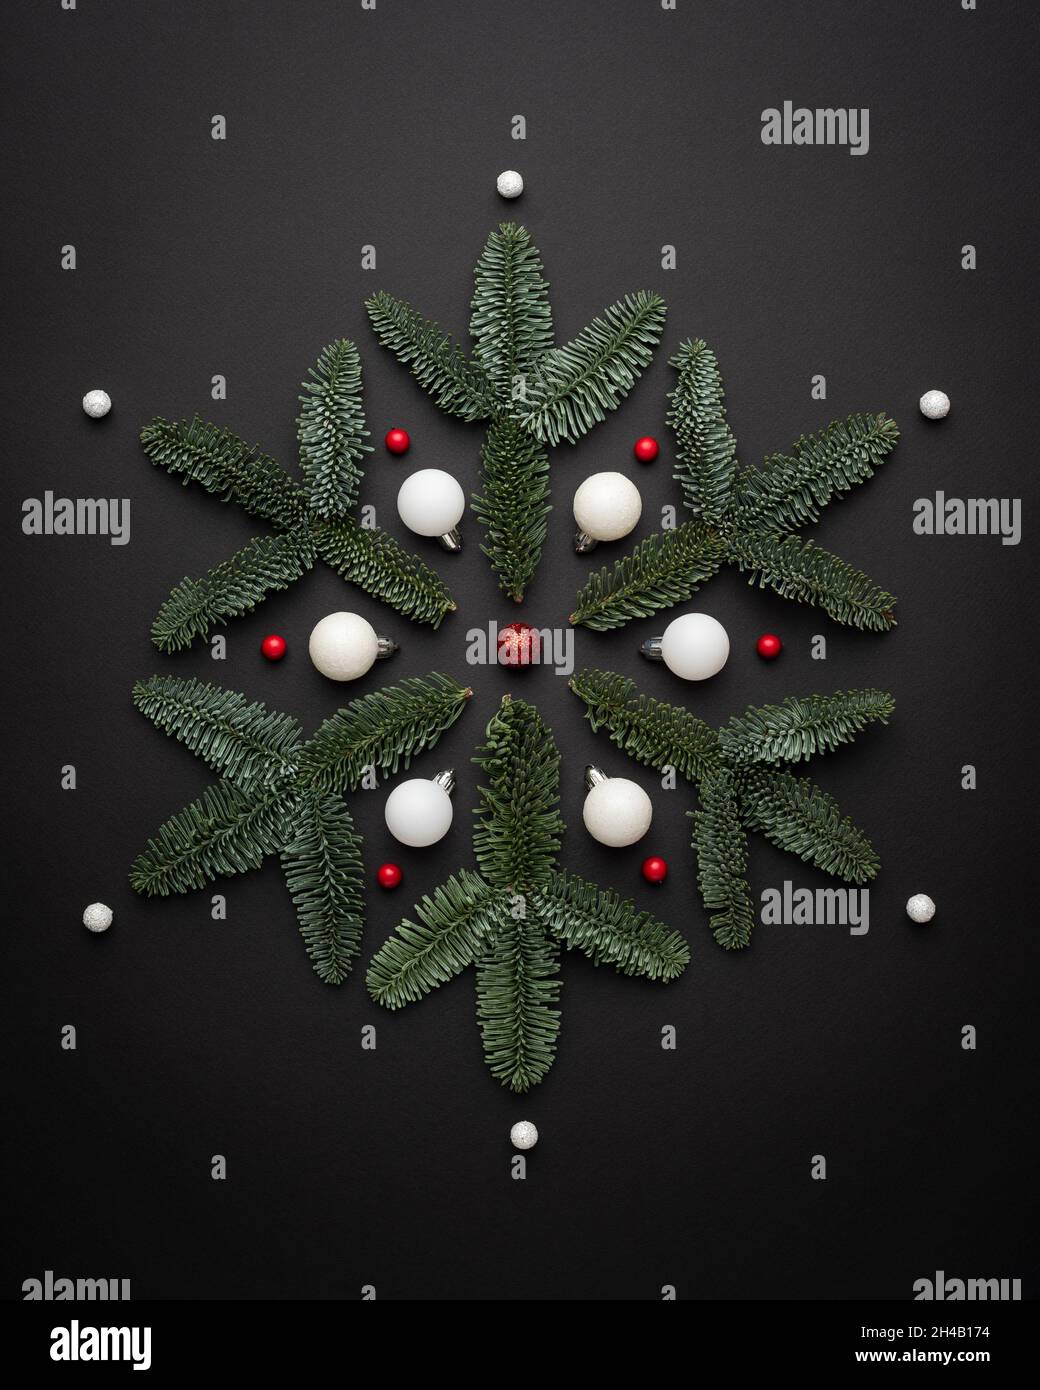 Conceptual Christmas card with decorative snowflake on a black background Stock Photo